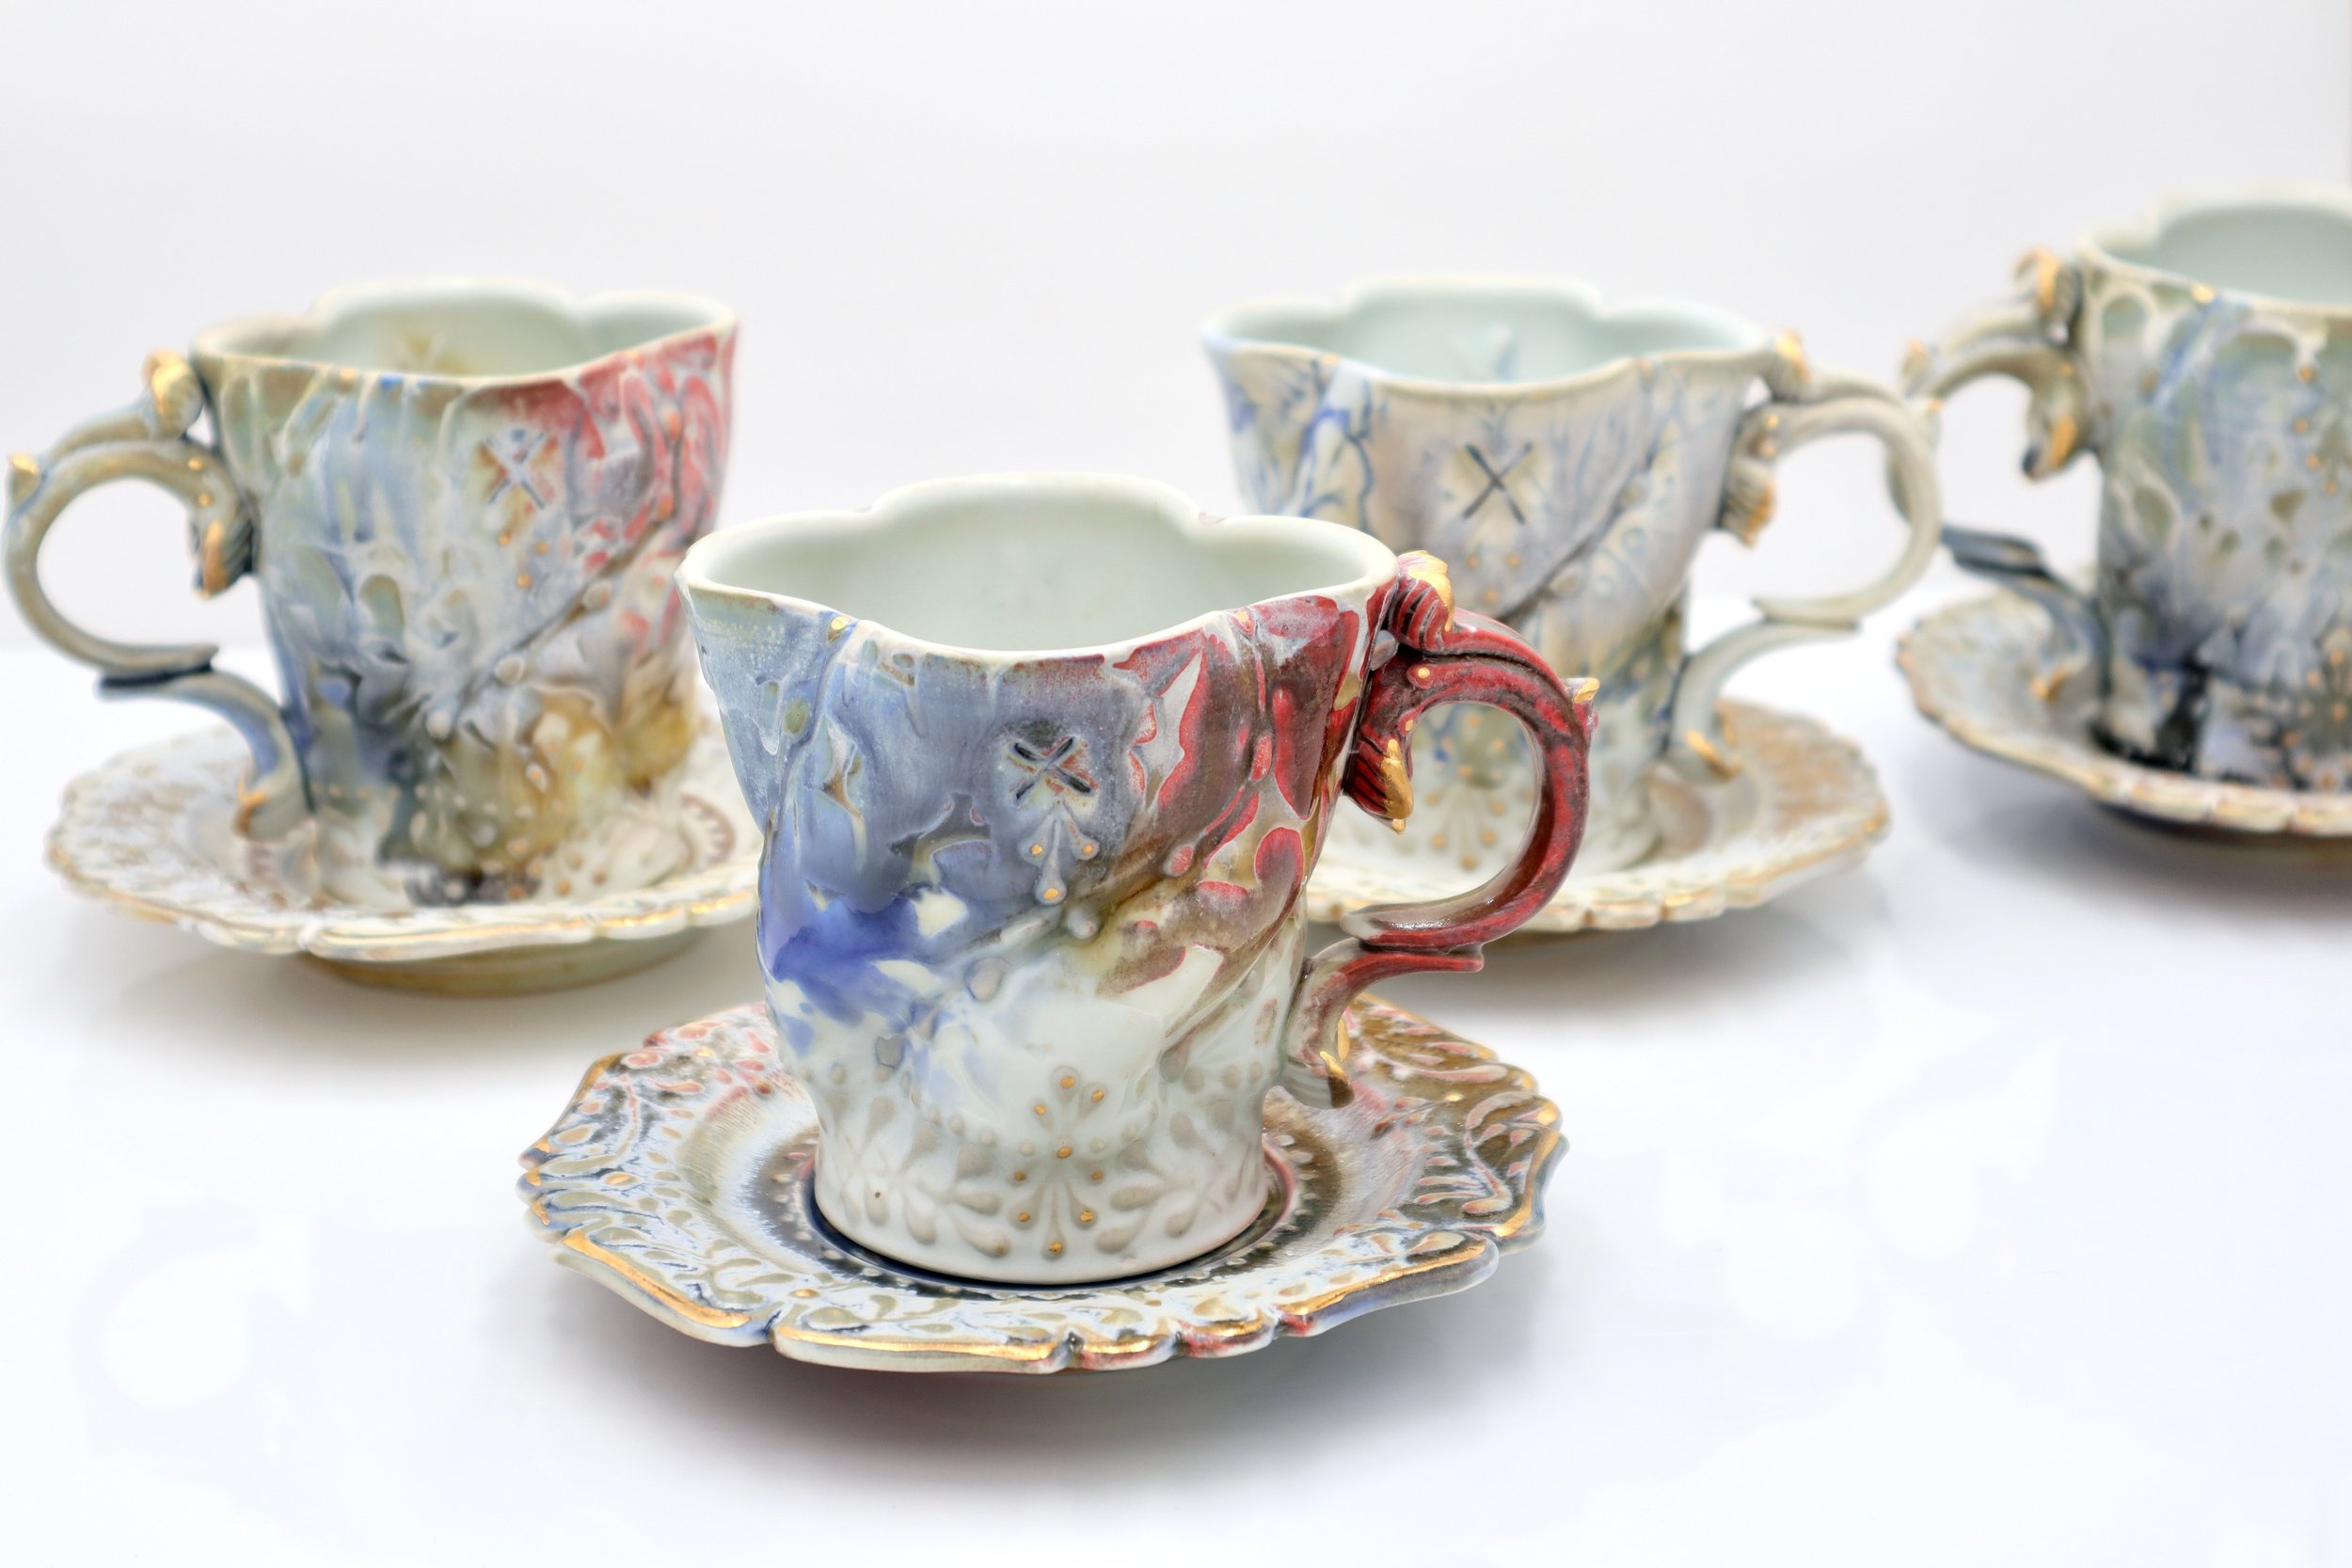  Ceramic tea cups by Mike Stumbras